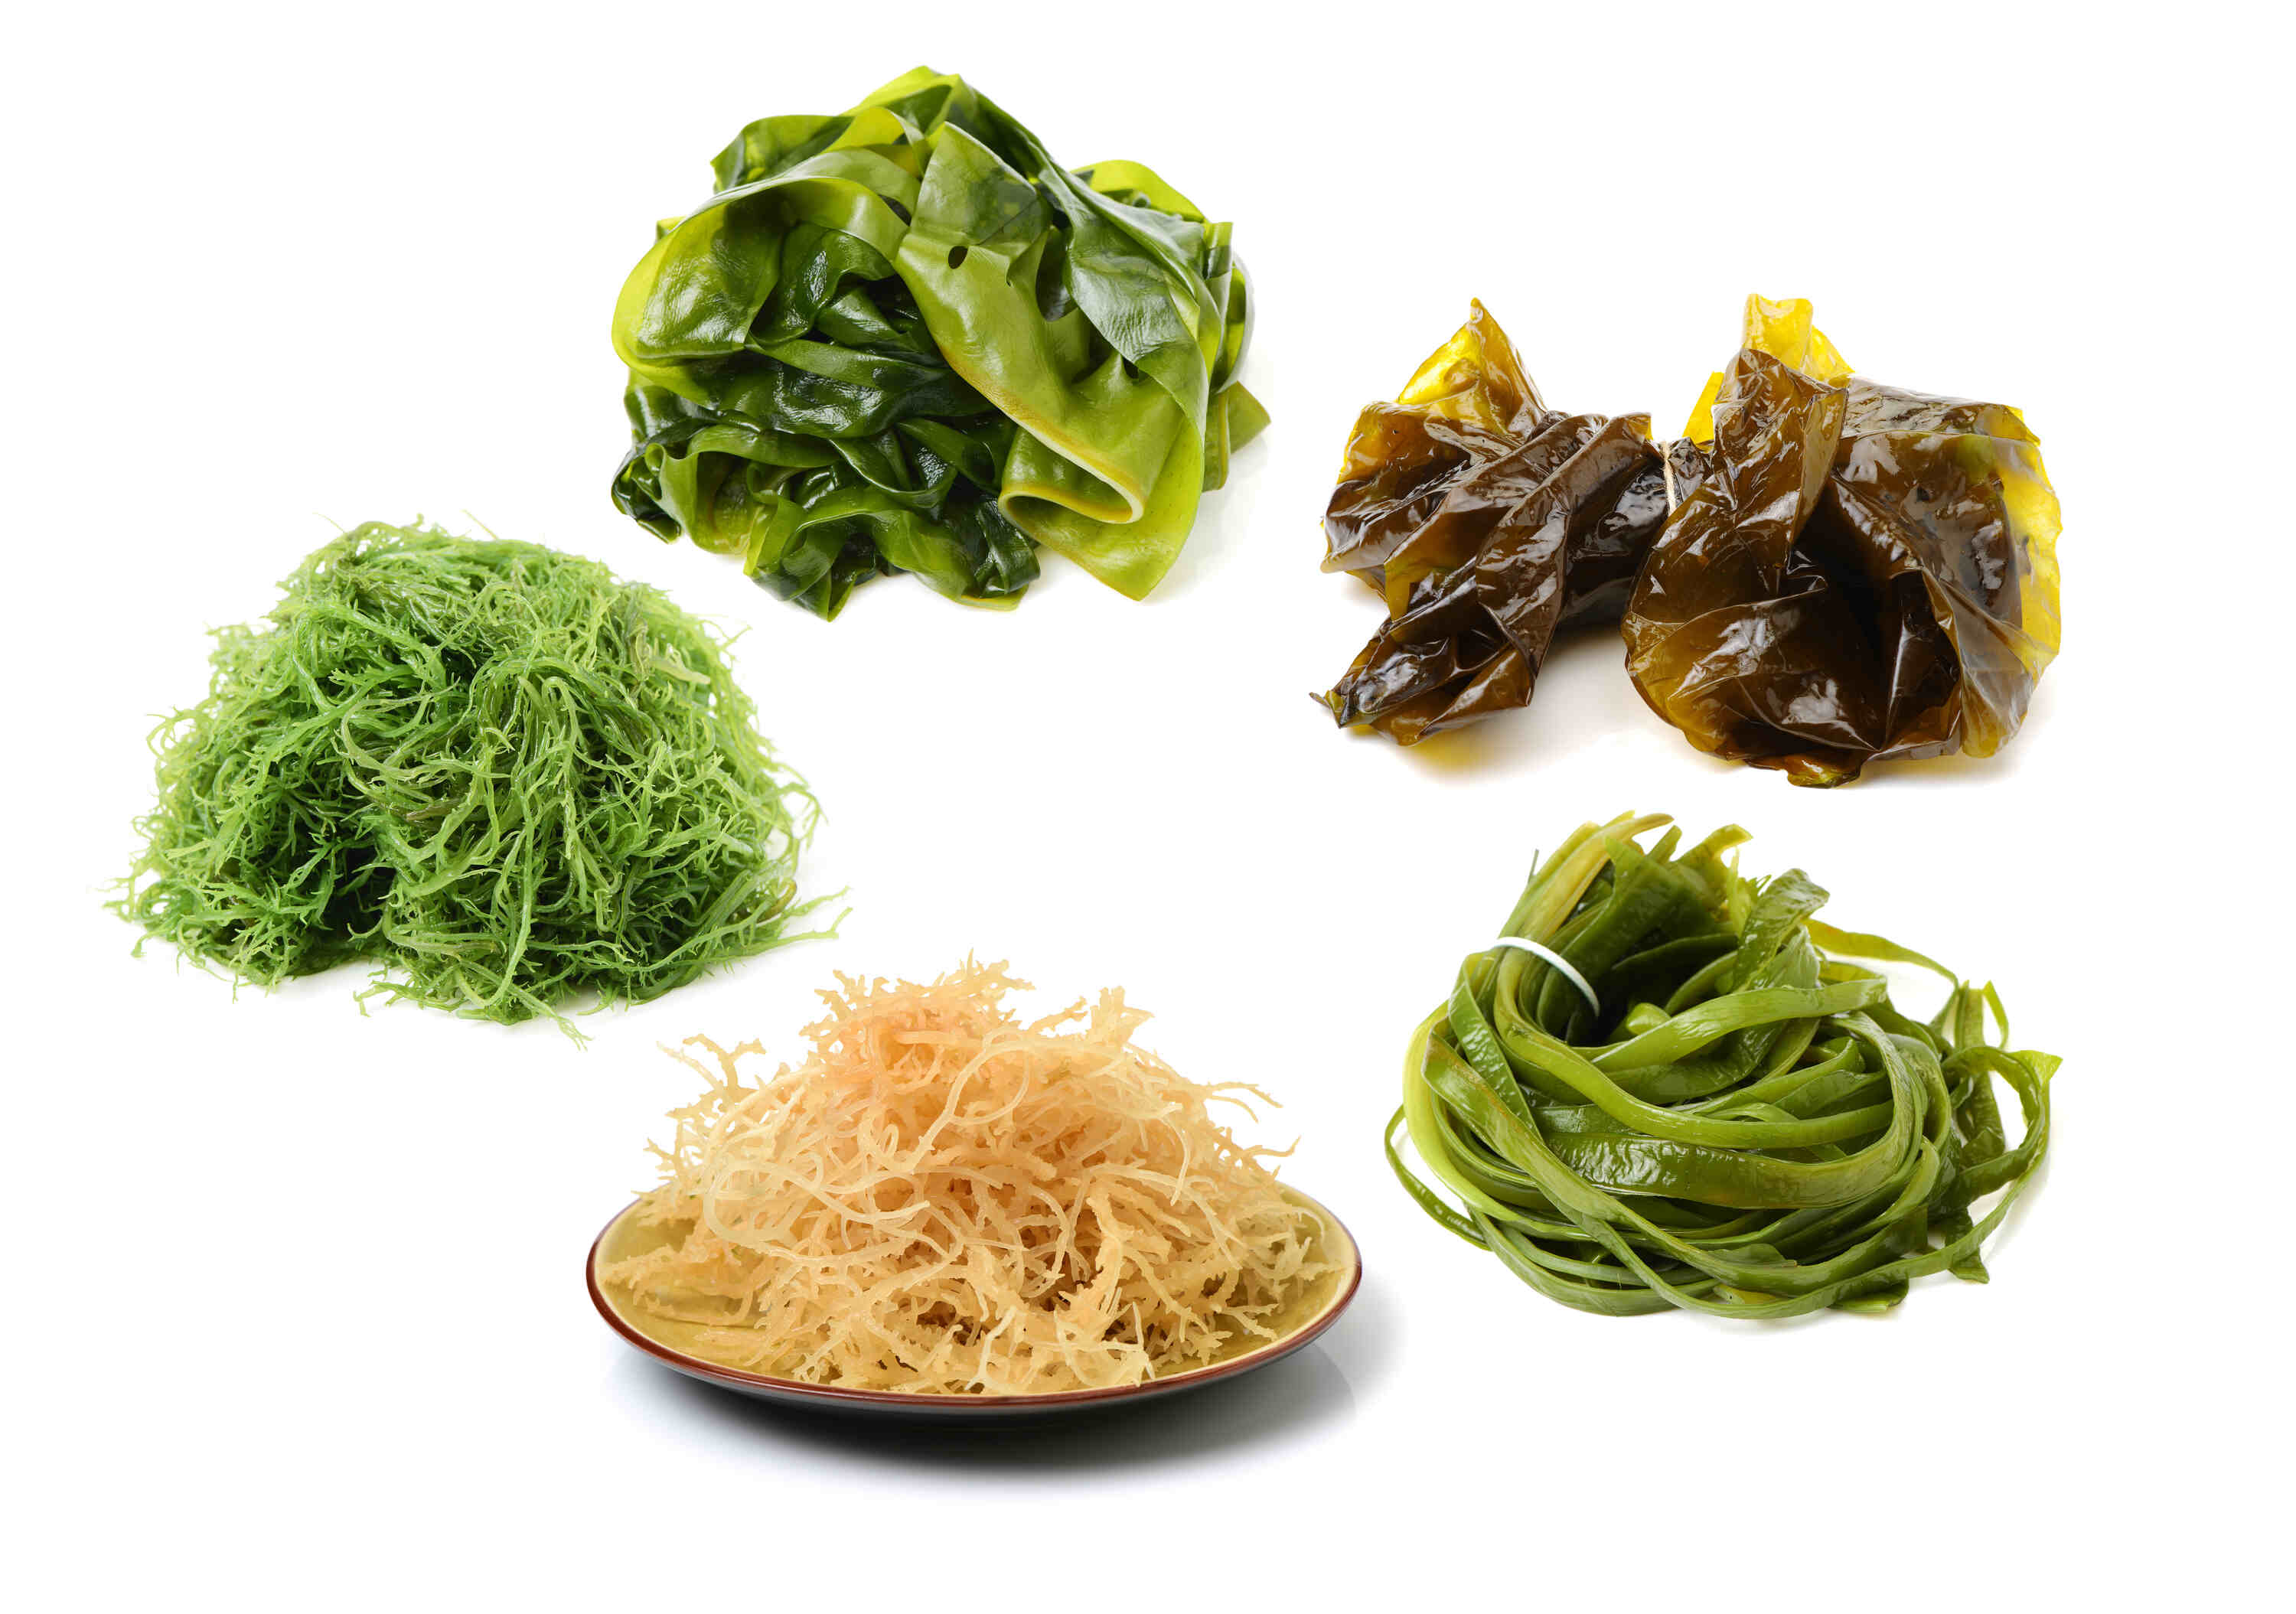 kelp, wakame and other seaweeds&nbsp;